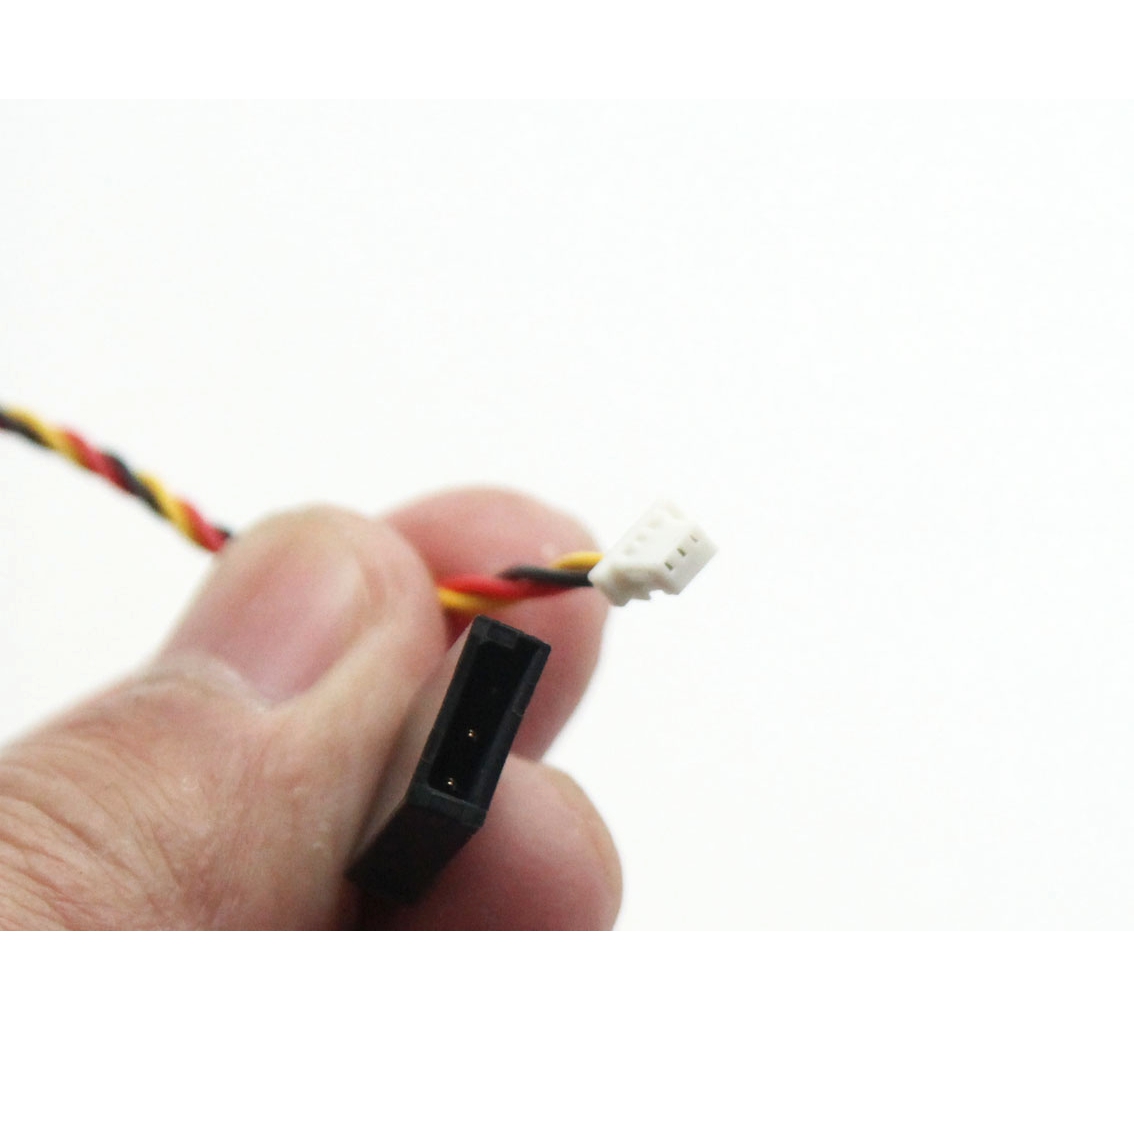 RC Servo Wire 15cm 28AWG Ar6400 Servo to Normal Servo Adpater Connector Cable TJC8 2.54mm JST-XH 1.0mm 3P Cable For FPV Racing Drone Aircraft Airplane DSMX DSM2 Receiver - Photo: 2